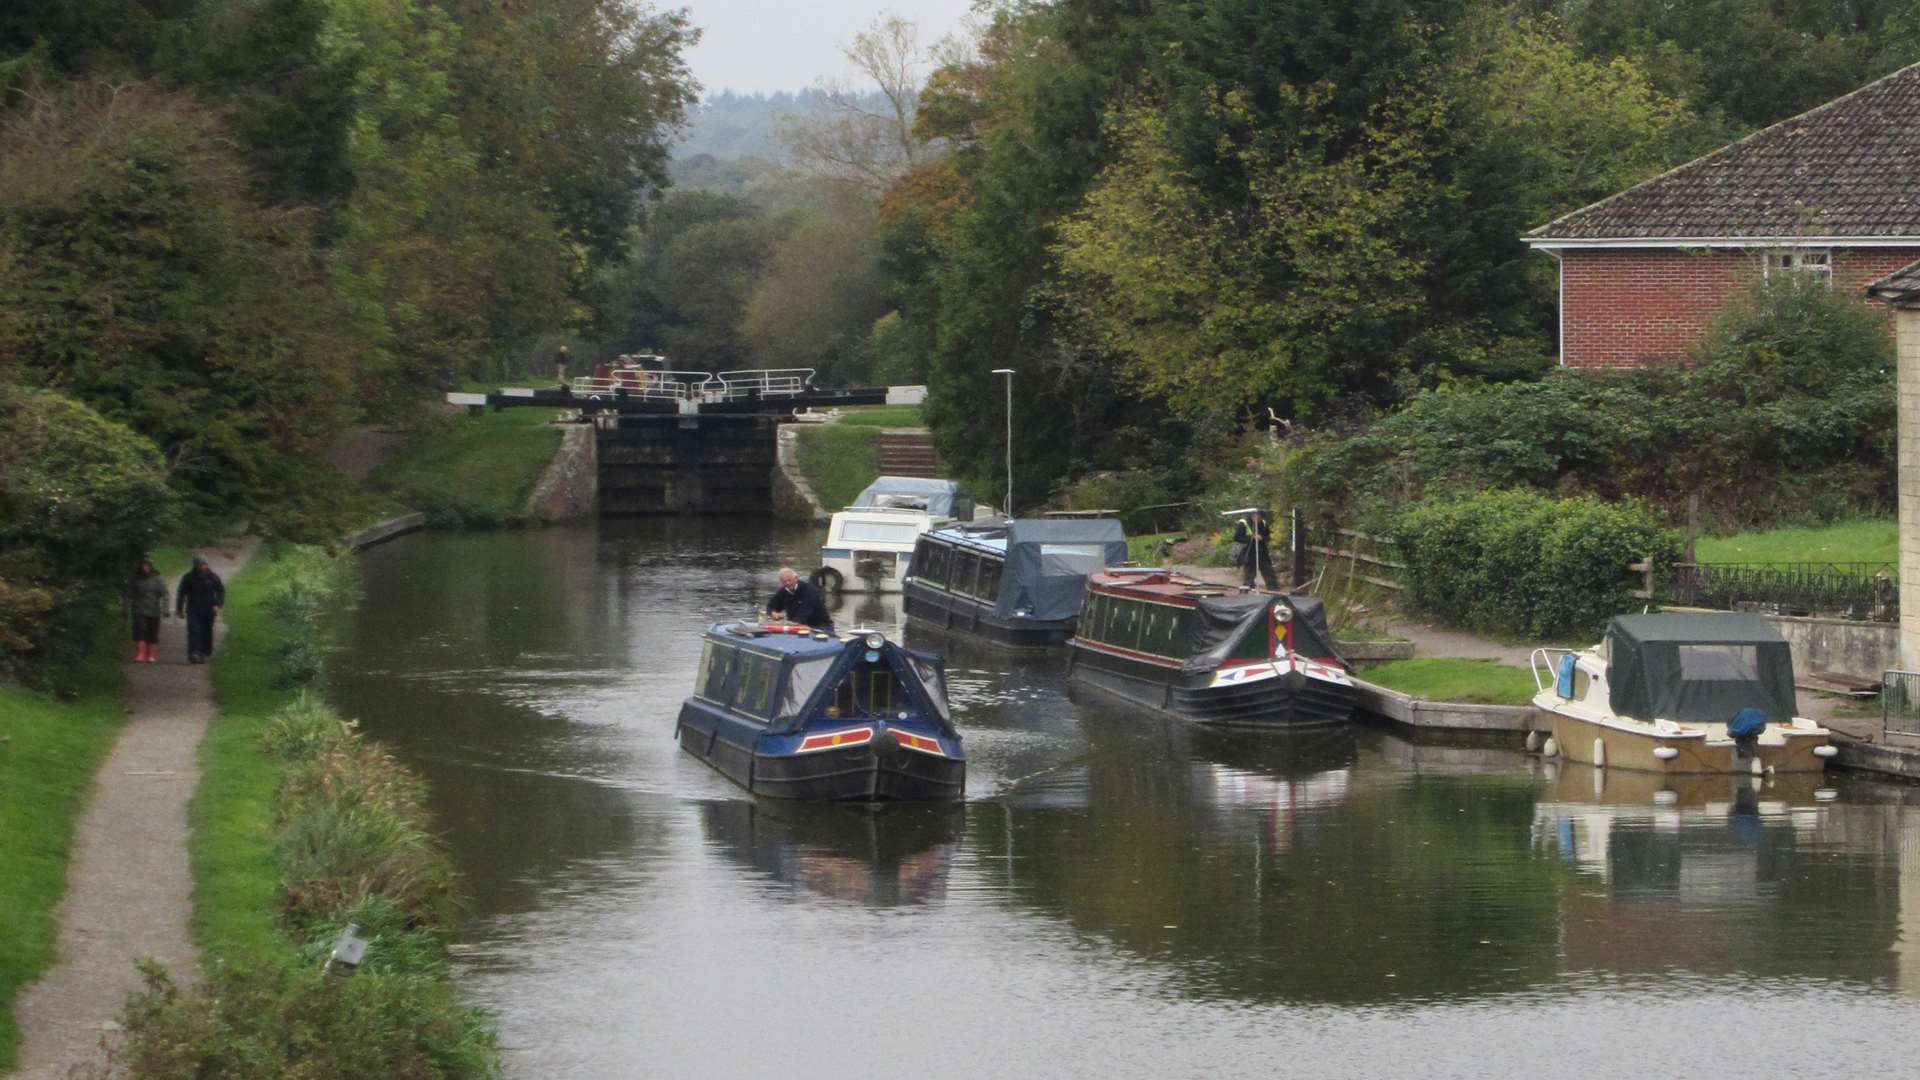 A view of the Kennet and Avon Canal, Hungerford